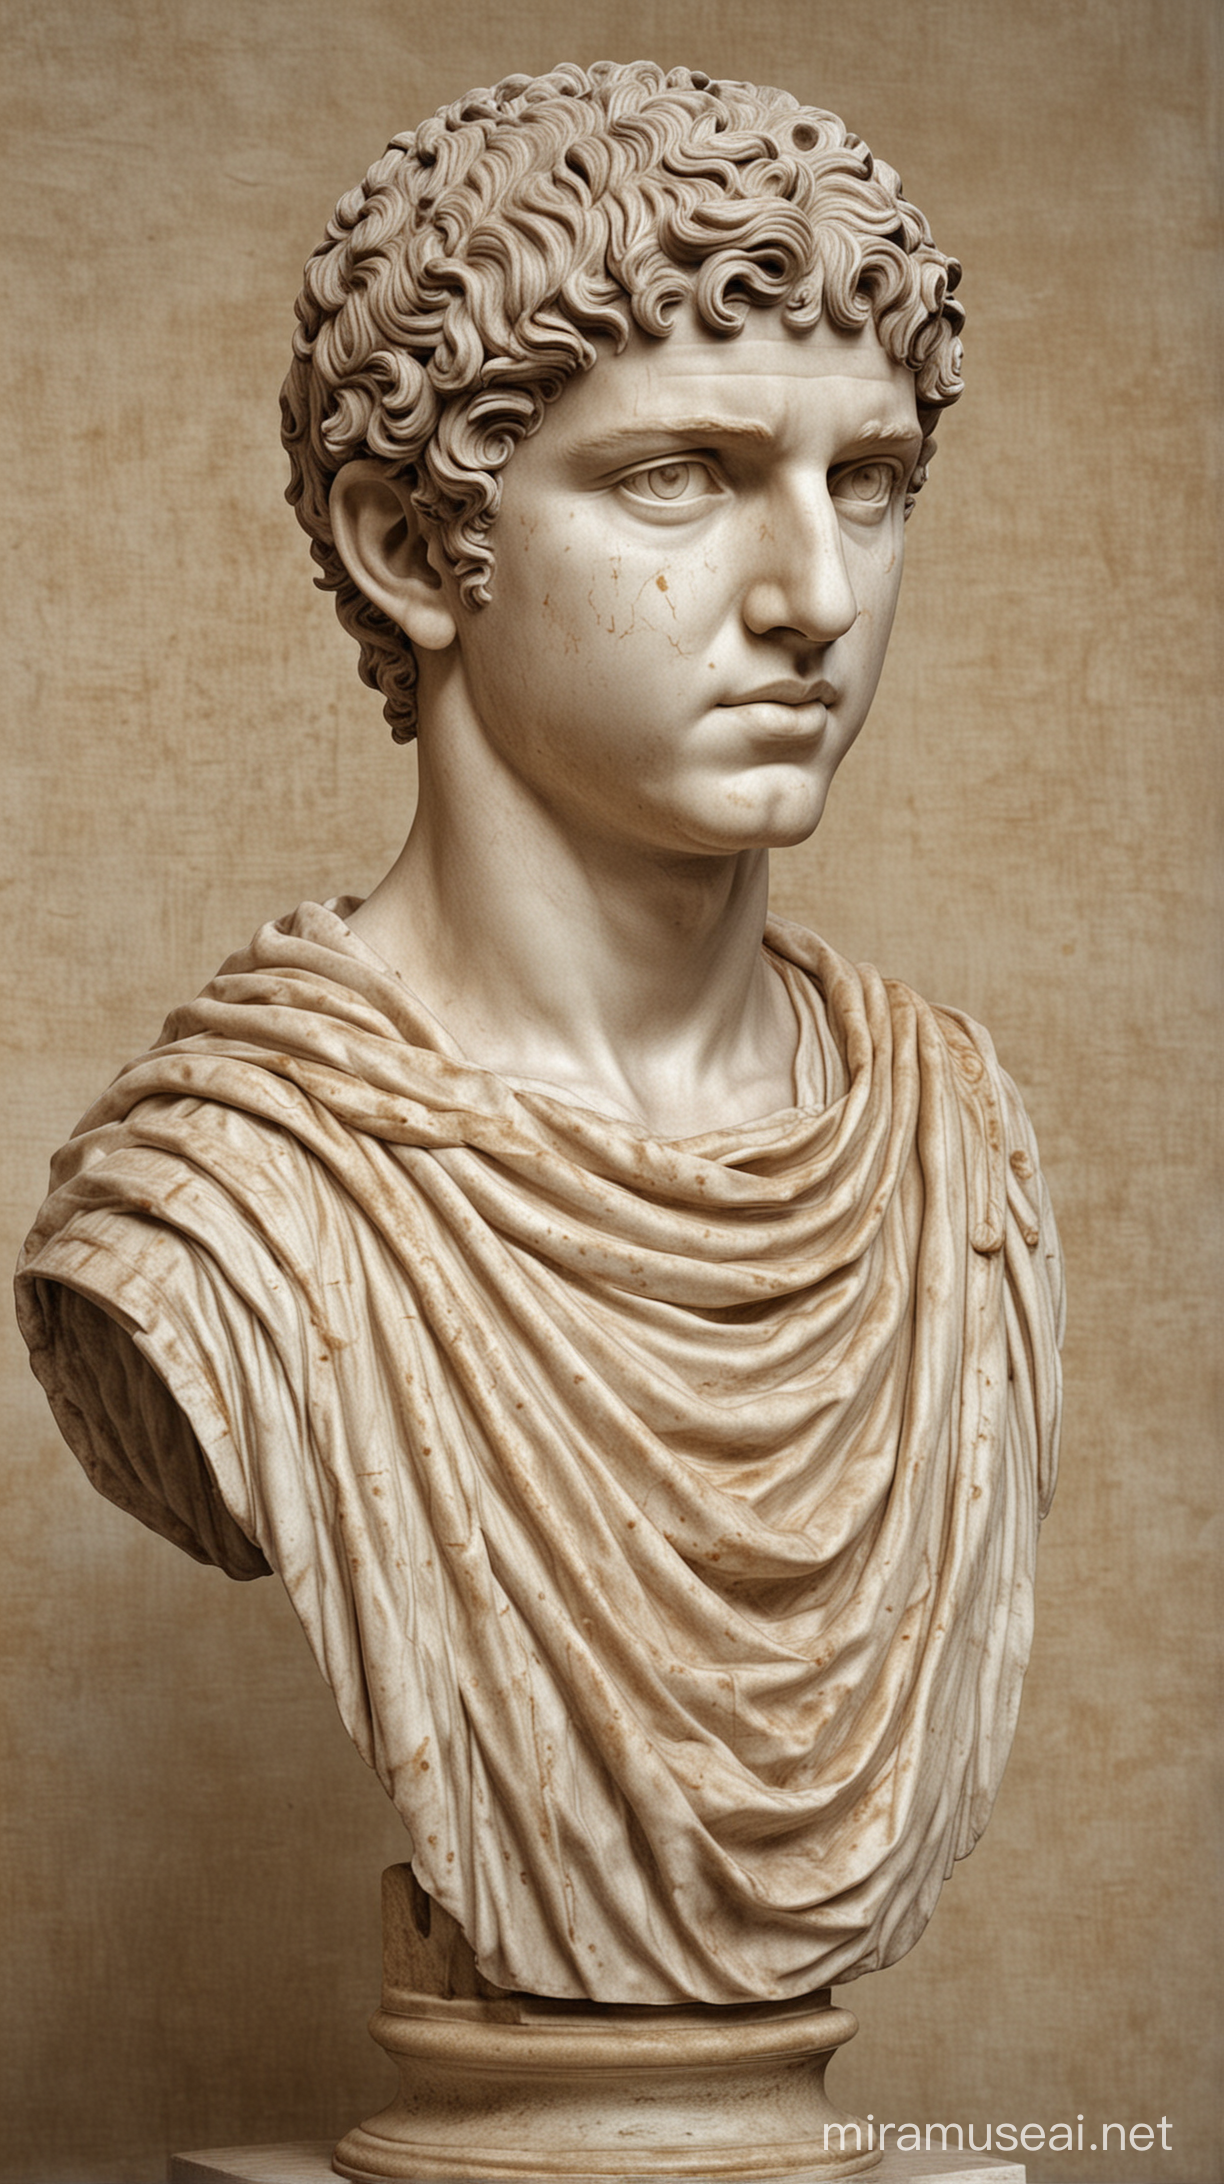 image of Roman emperor Elagabalus when he was in just 14 years old